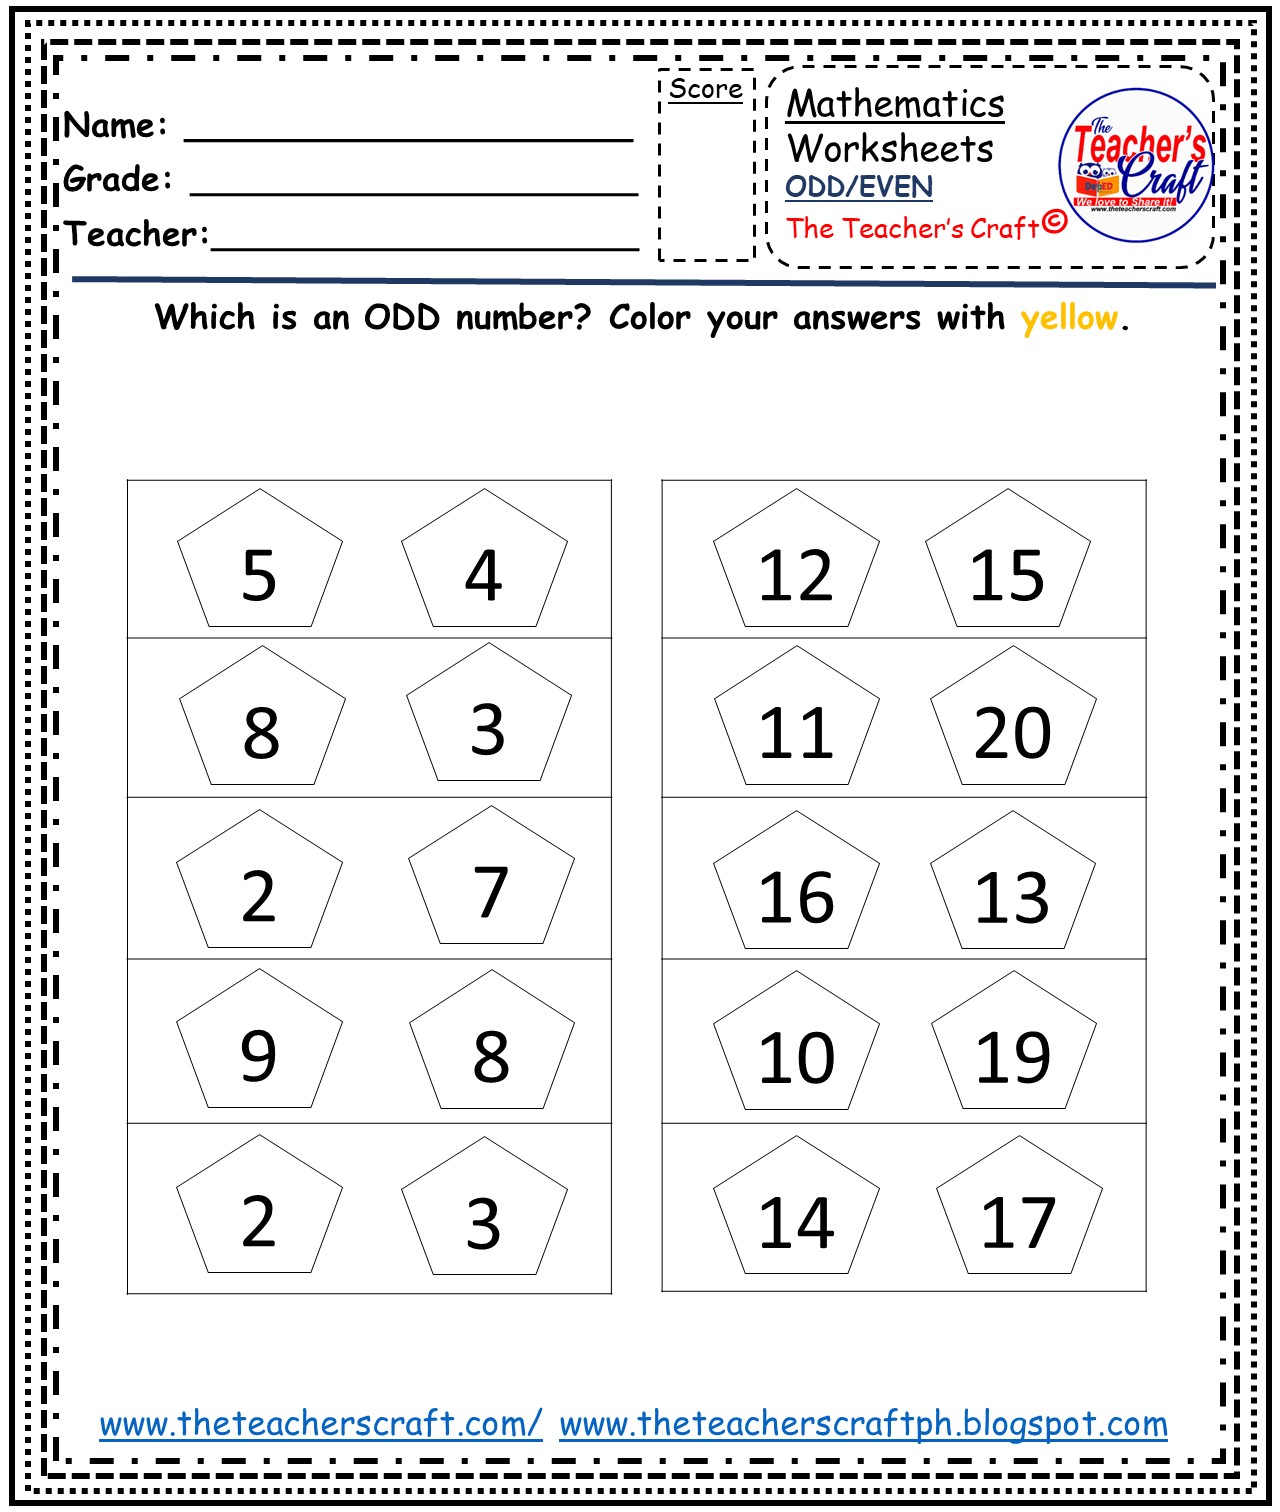 2nd-grade-odd-and-even-numbers-worksheets-kidsworksheetfun-even-and-odd-number-worksheets-free